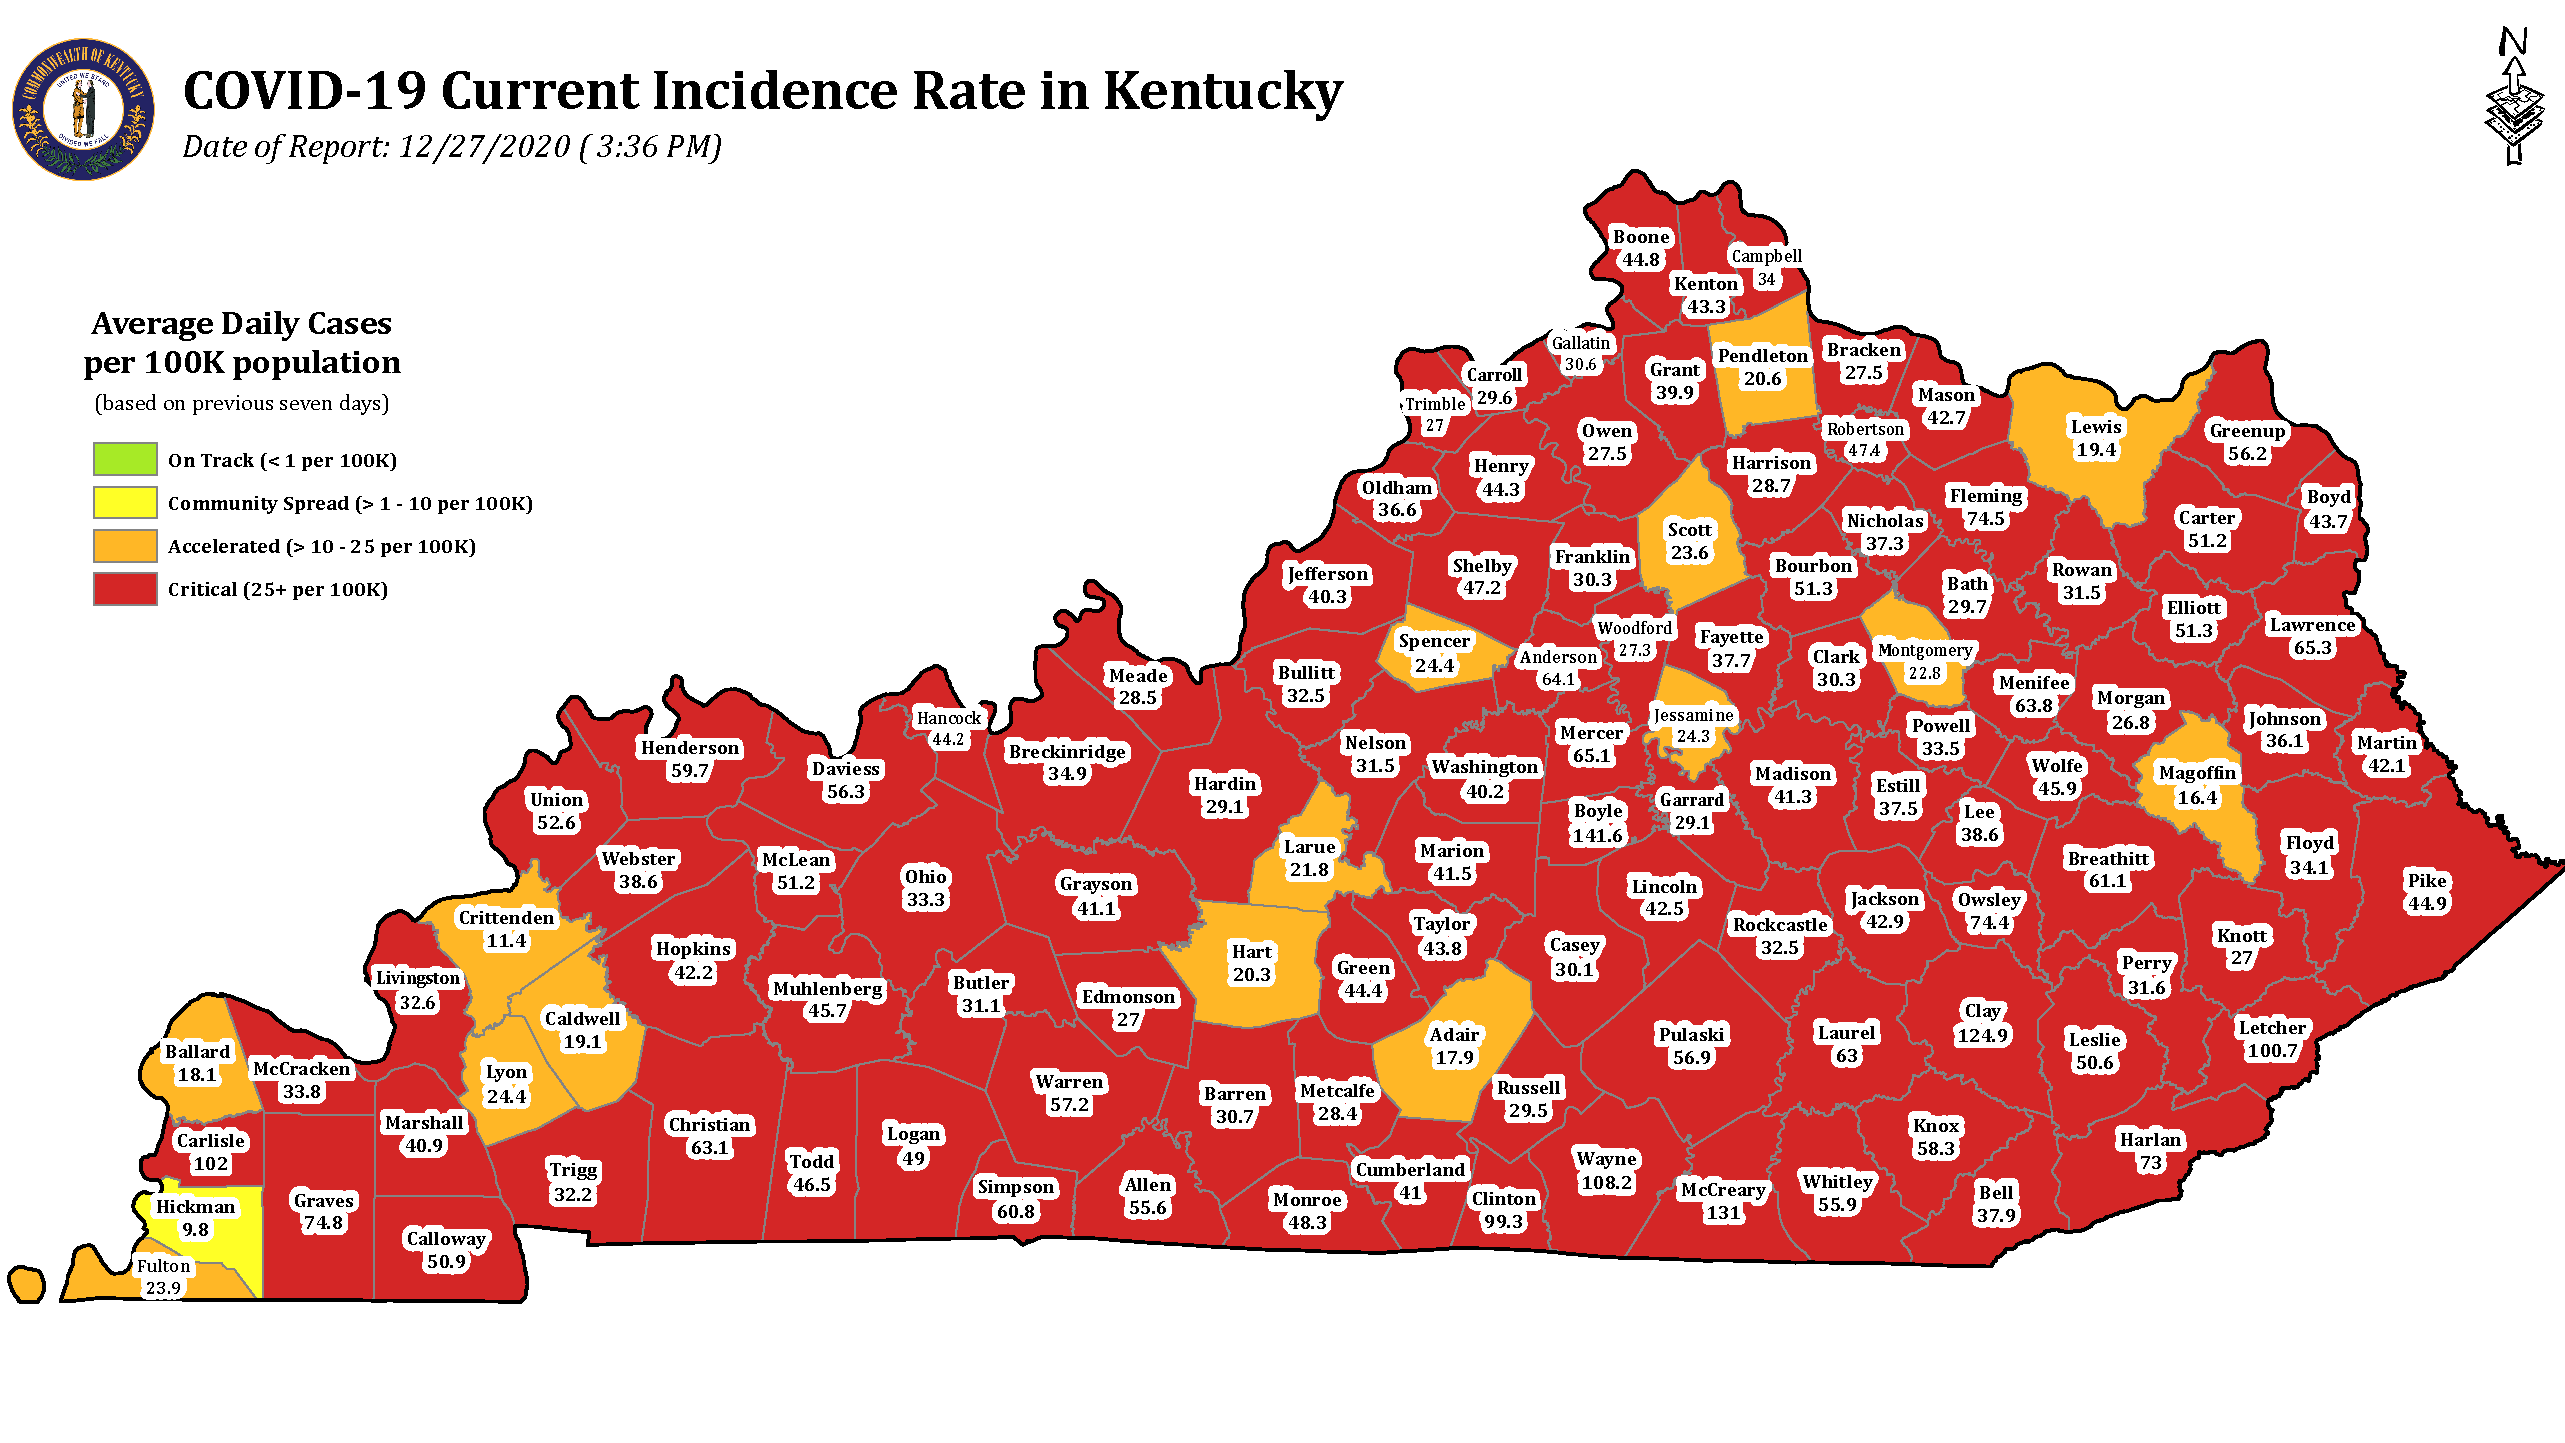 Beshear says virus numbers show Kentucky’s steps are working